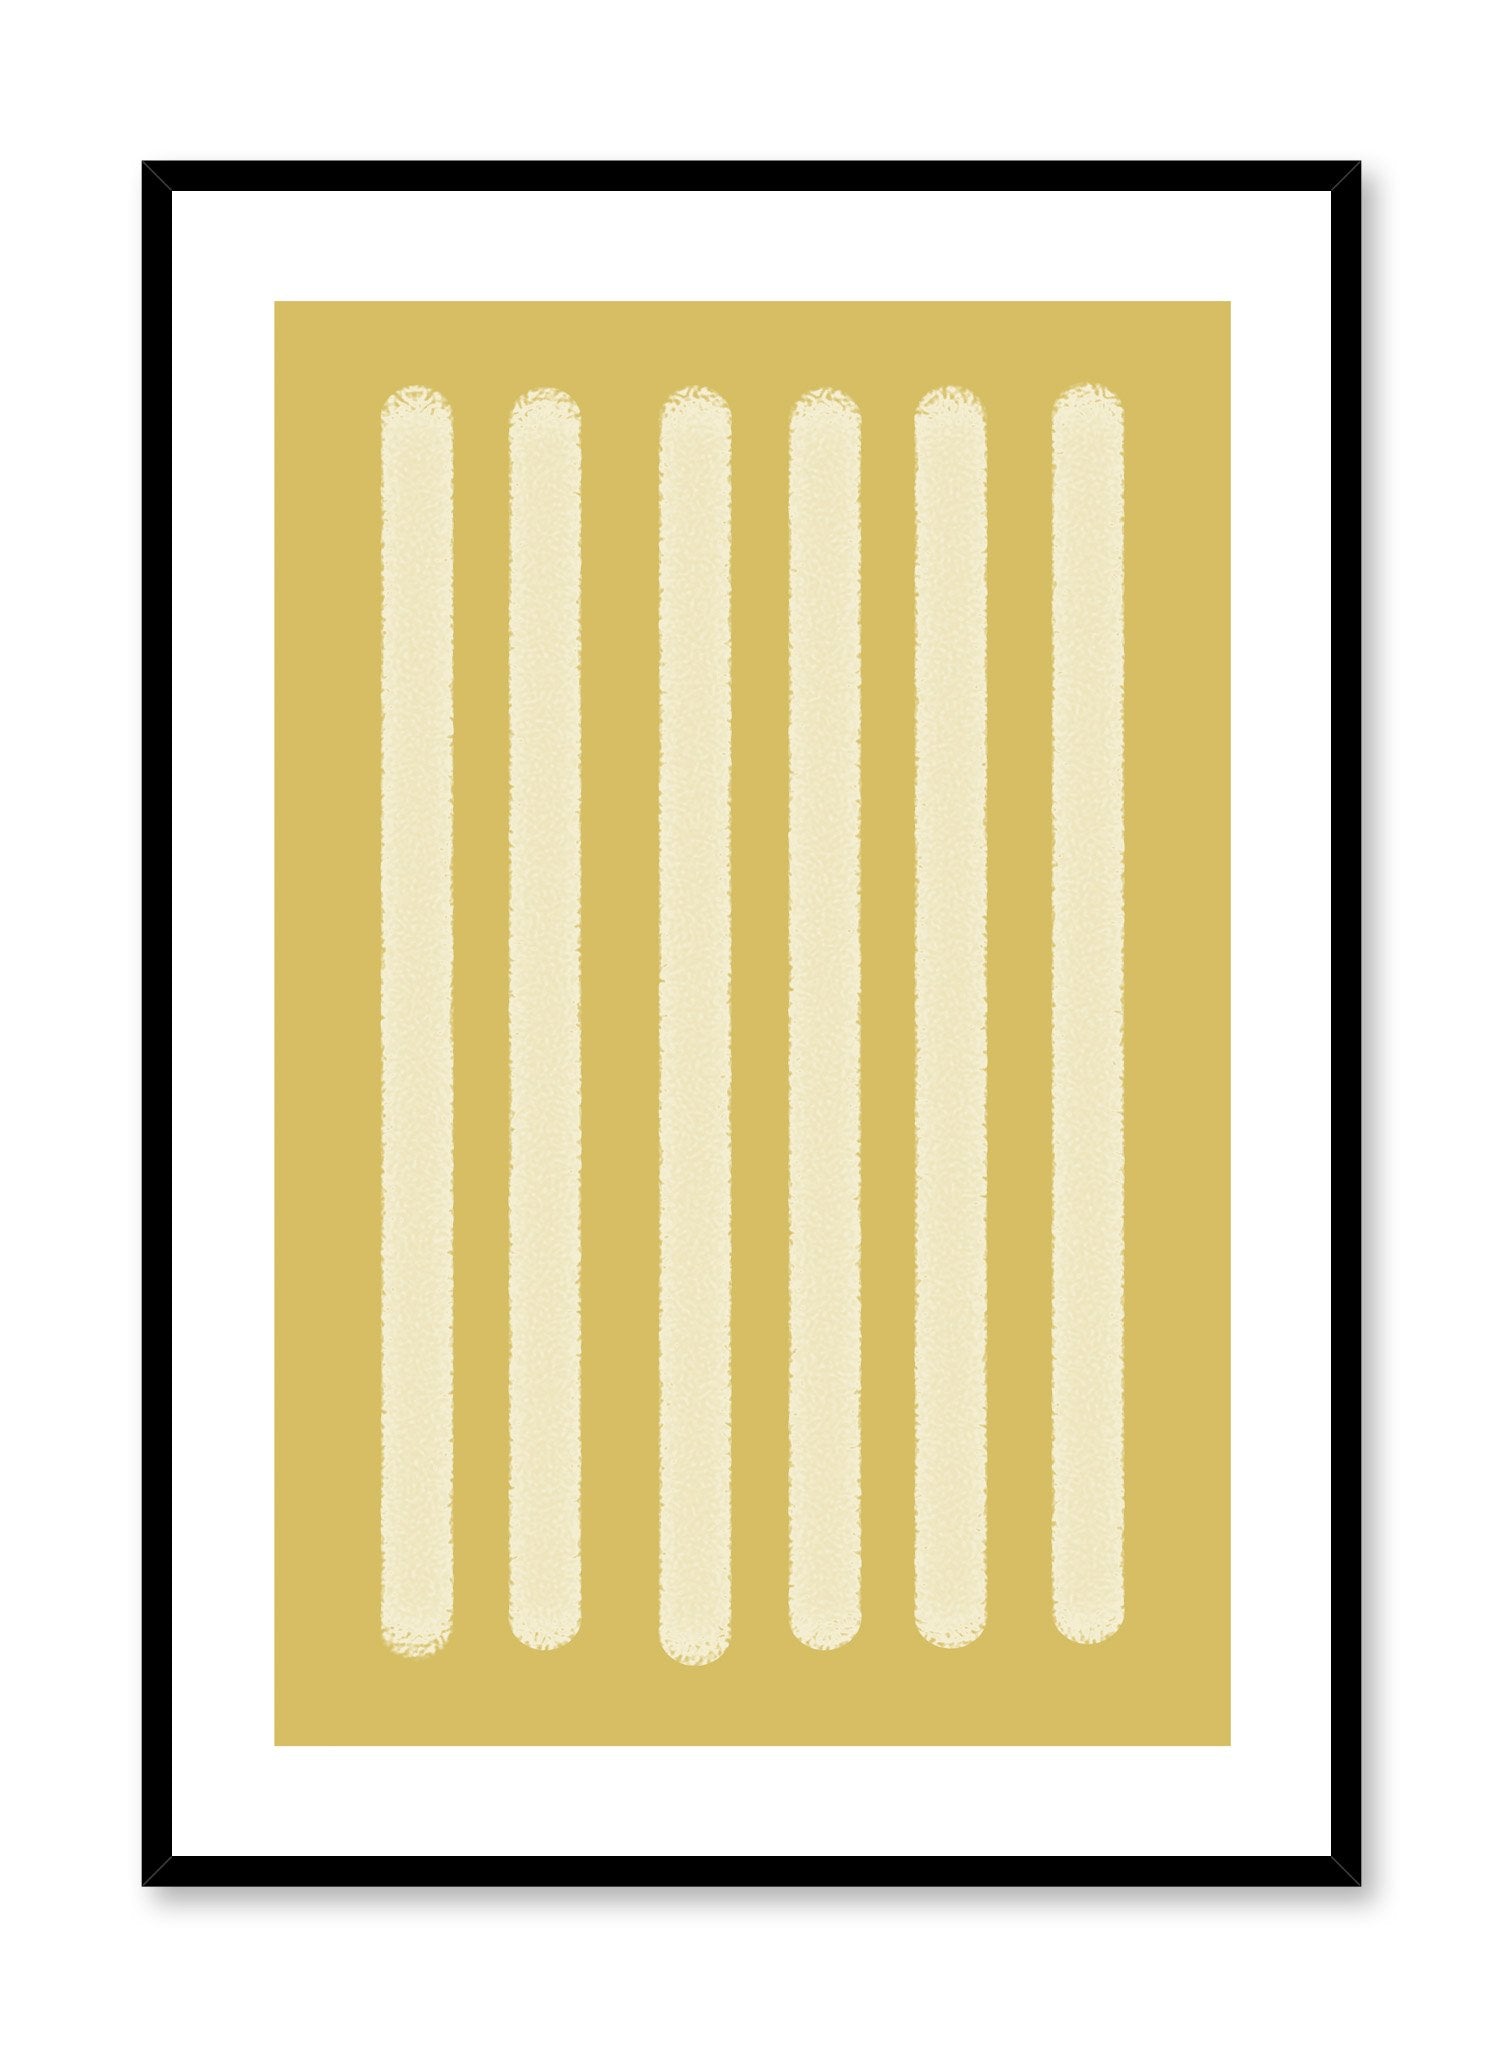 Minimalist design poster by Opposite Wall with abstract yellow rectangle shapes